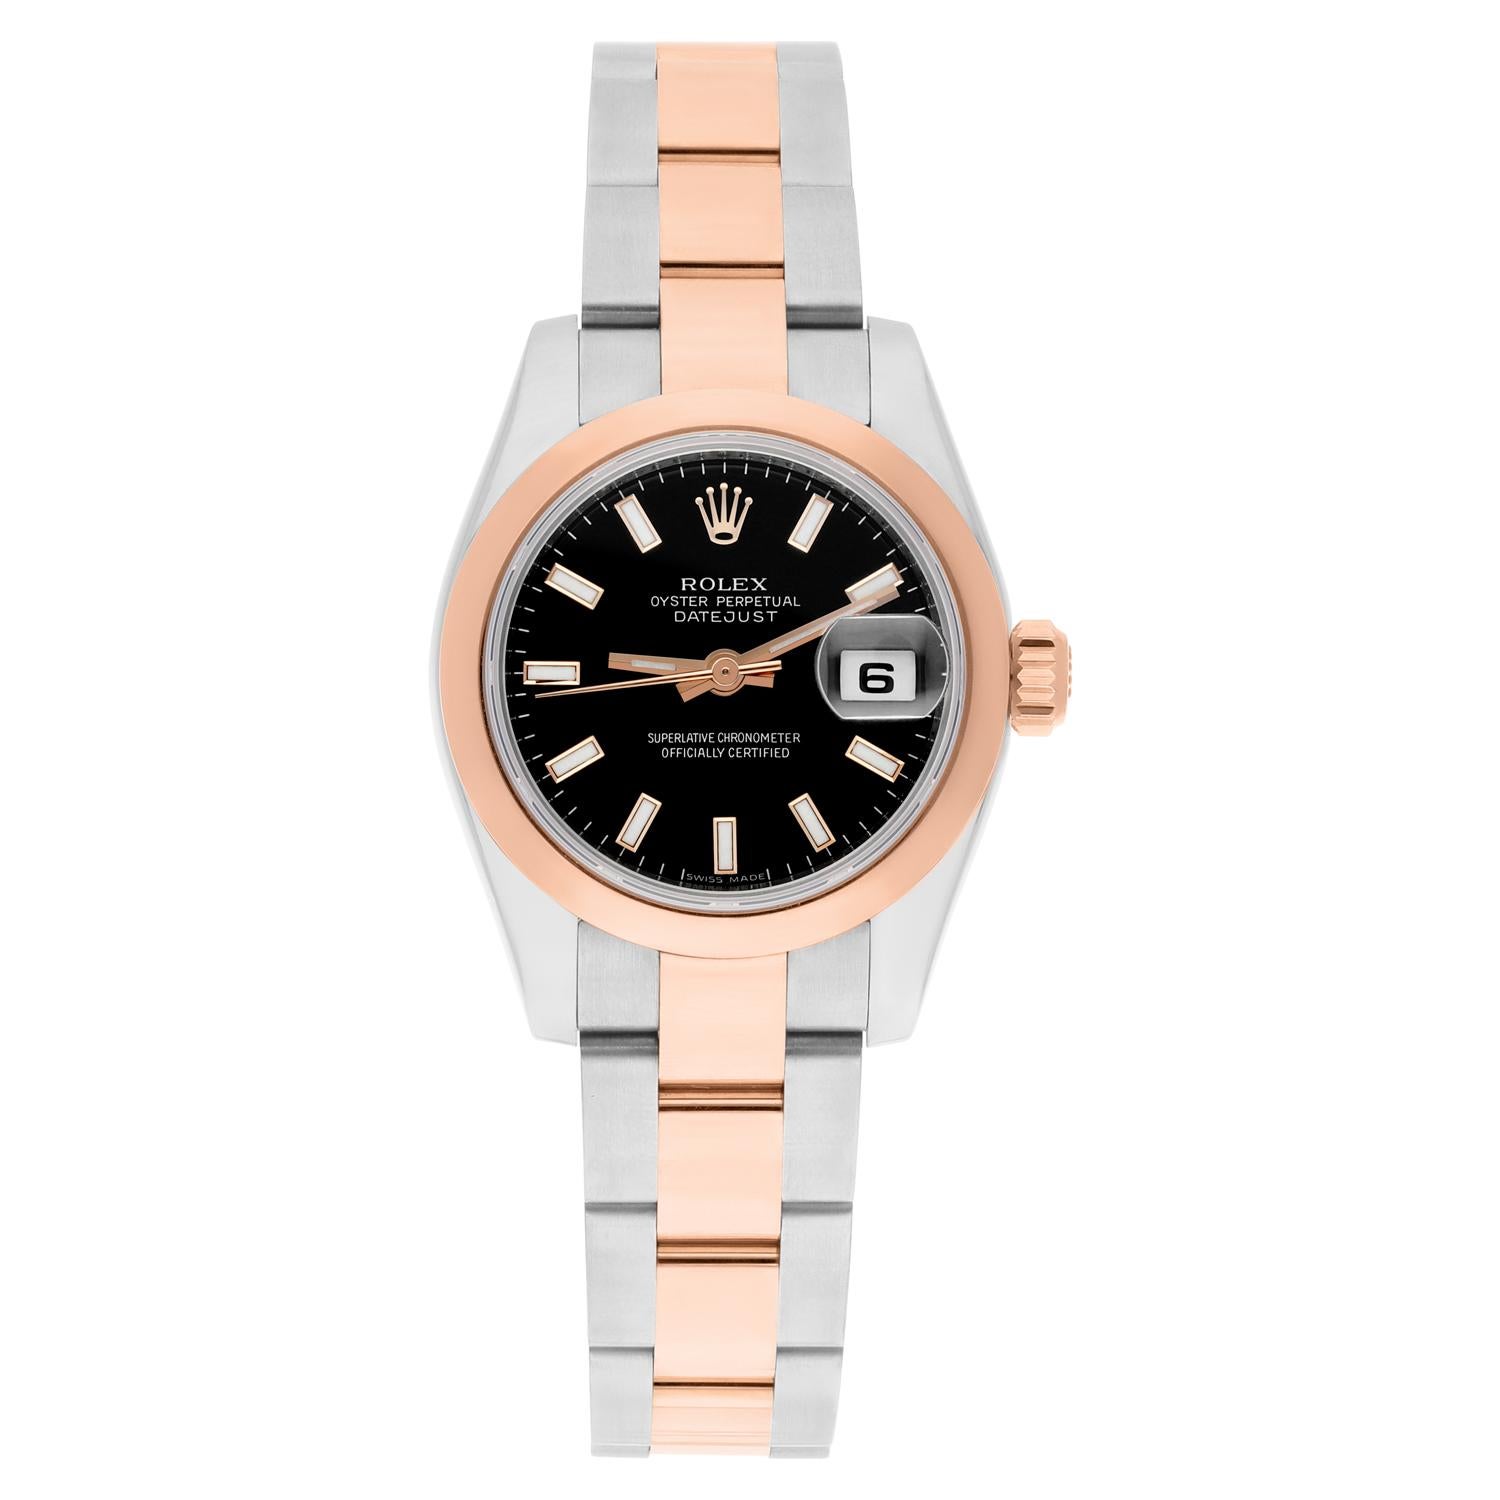 Rolex Datejust 179161 is a luxurious and stylish women's wristwatch featuring 26mm casei size that has been discontinued.  Still under Rolex International warranty until September 2025 it comes with original Rolex box and original Rolex papers. This